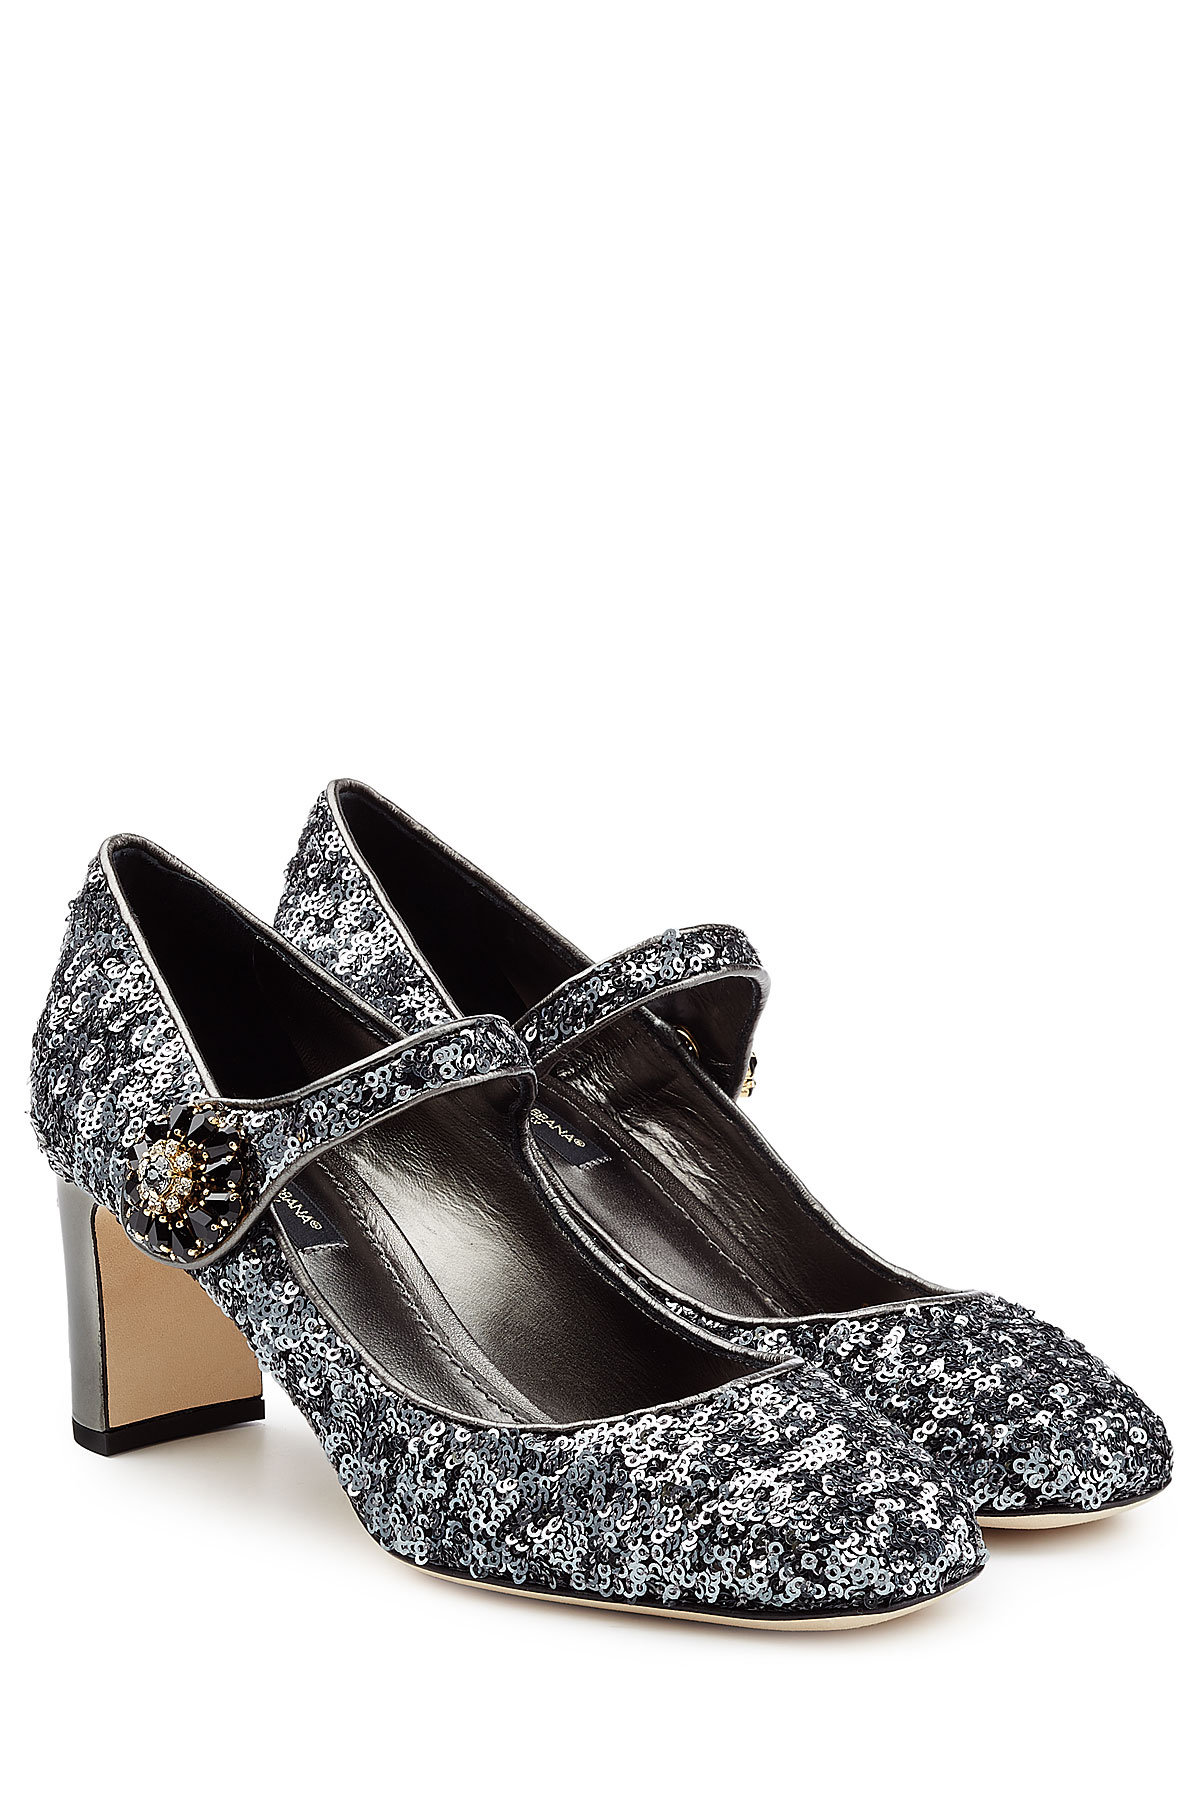 Sequin Mary-Jane Pumps by Dolce & Gabbana